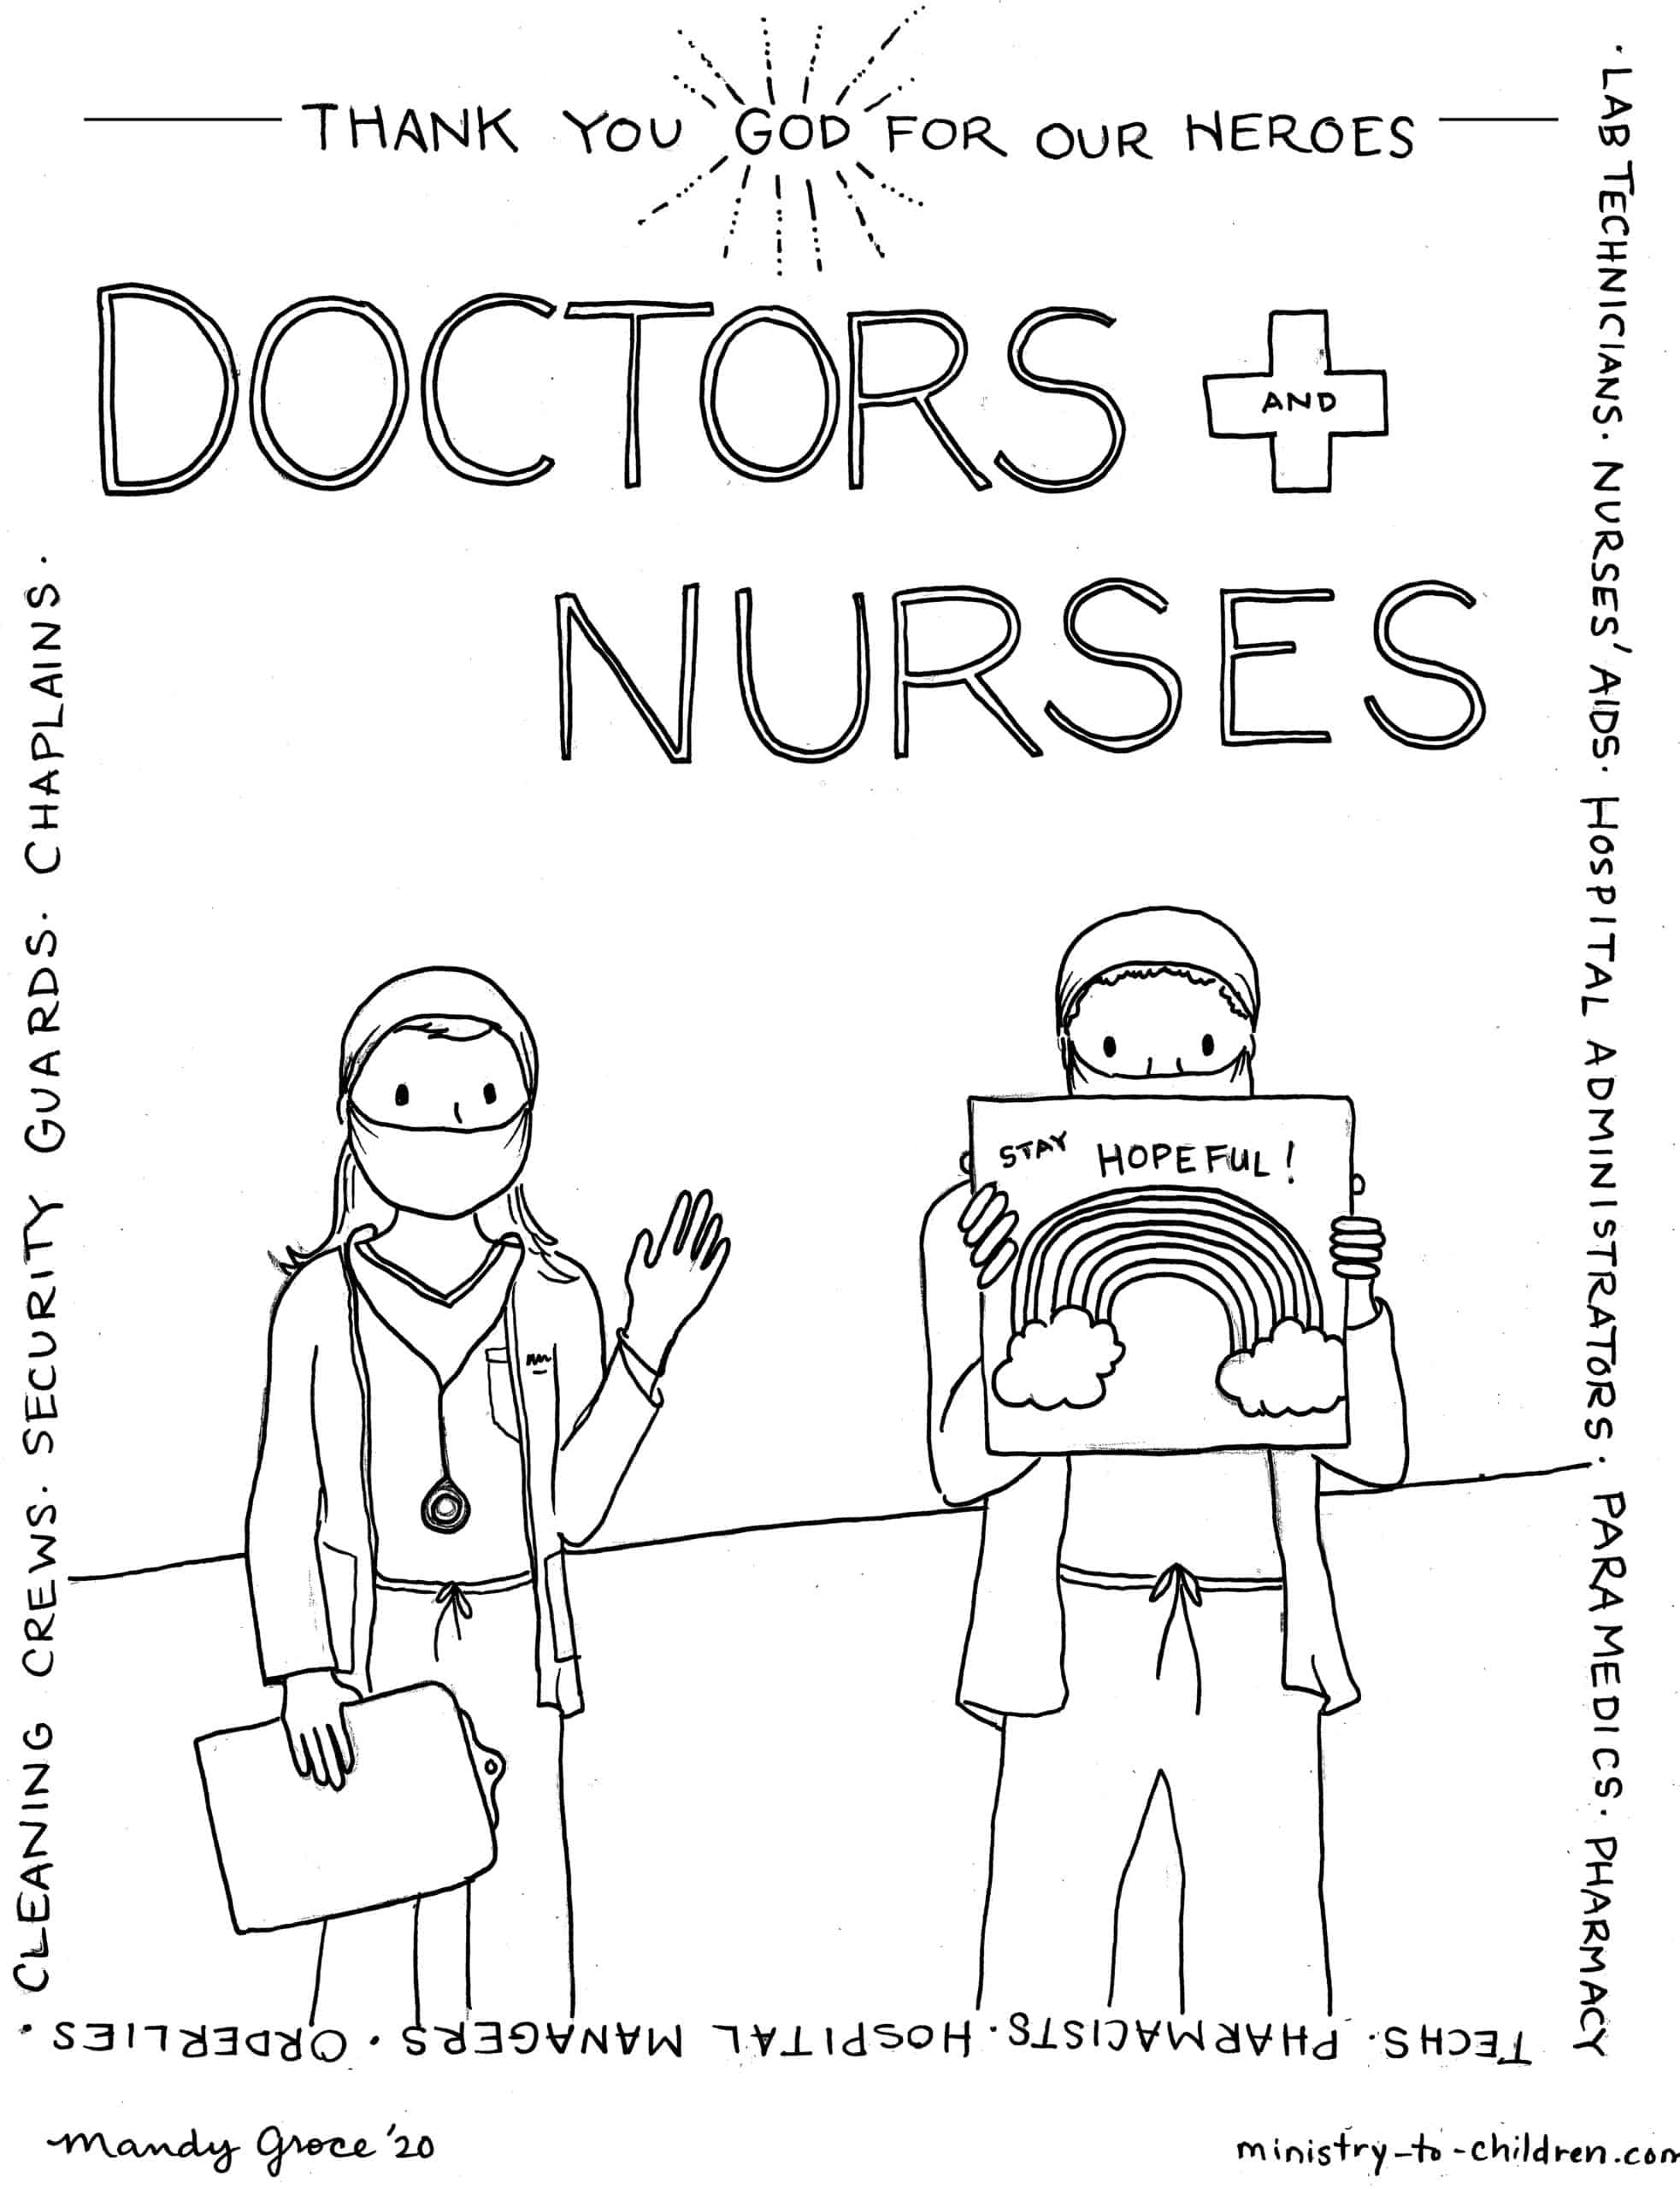 Coloring page healthcare workers are heroes doctors and nurses